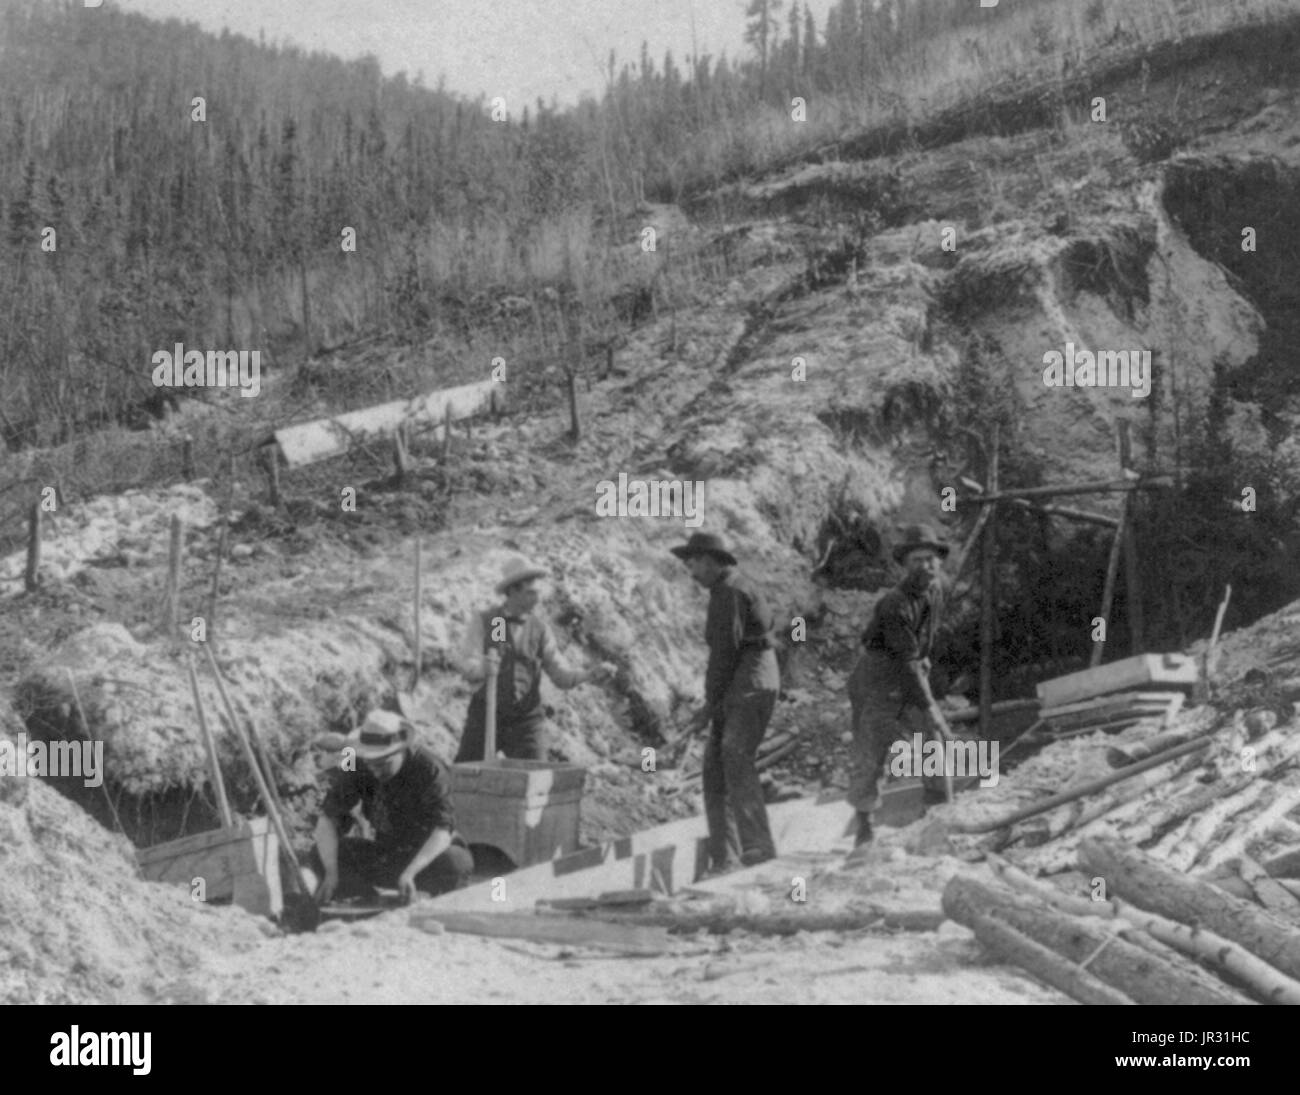 Placer mining for gold at Discovery Claim in the Klondike. The Klondike Gold Rush was a migration by an estimated 100,000 prospectors to the Klondike region of the Yukon between 1896-99. Gold was discovered by local miners on August 16, 1896 and, when news reached Seattle and San Francisco, it triggered a stampede of would-be prospectors. To reach the gold fields most took the route through the ports of Dyea and Skagway in Alaska. Here, the Klondikers could follow either the Chilkoot or the White Pass trails to the Yukon River and sail down to the Klondike. Each of them was required to bring a Stock Photo